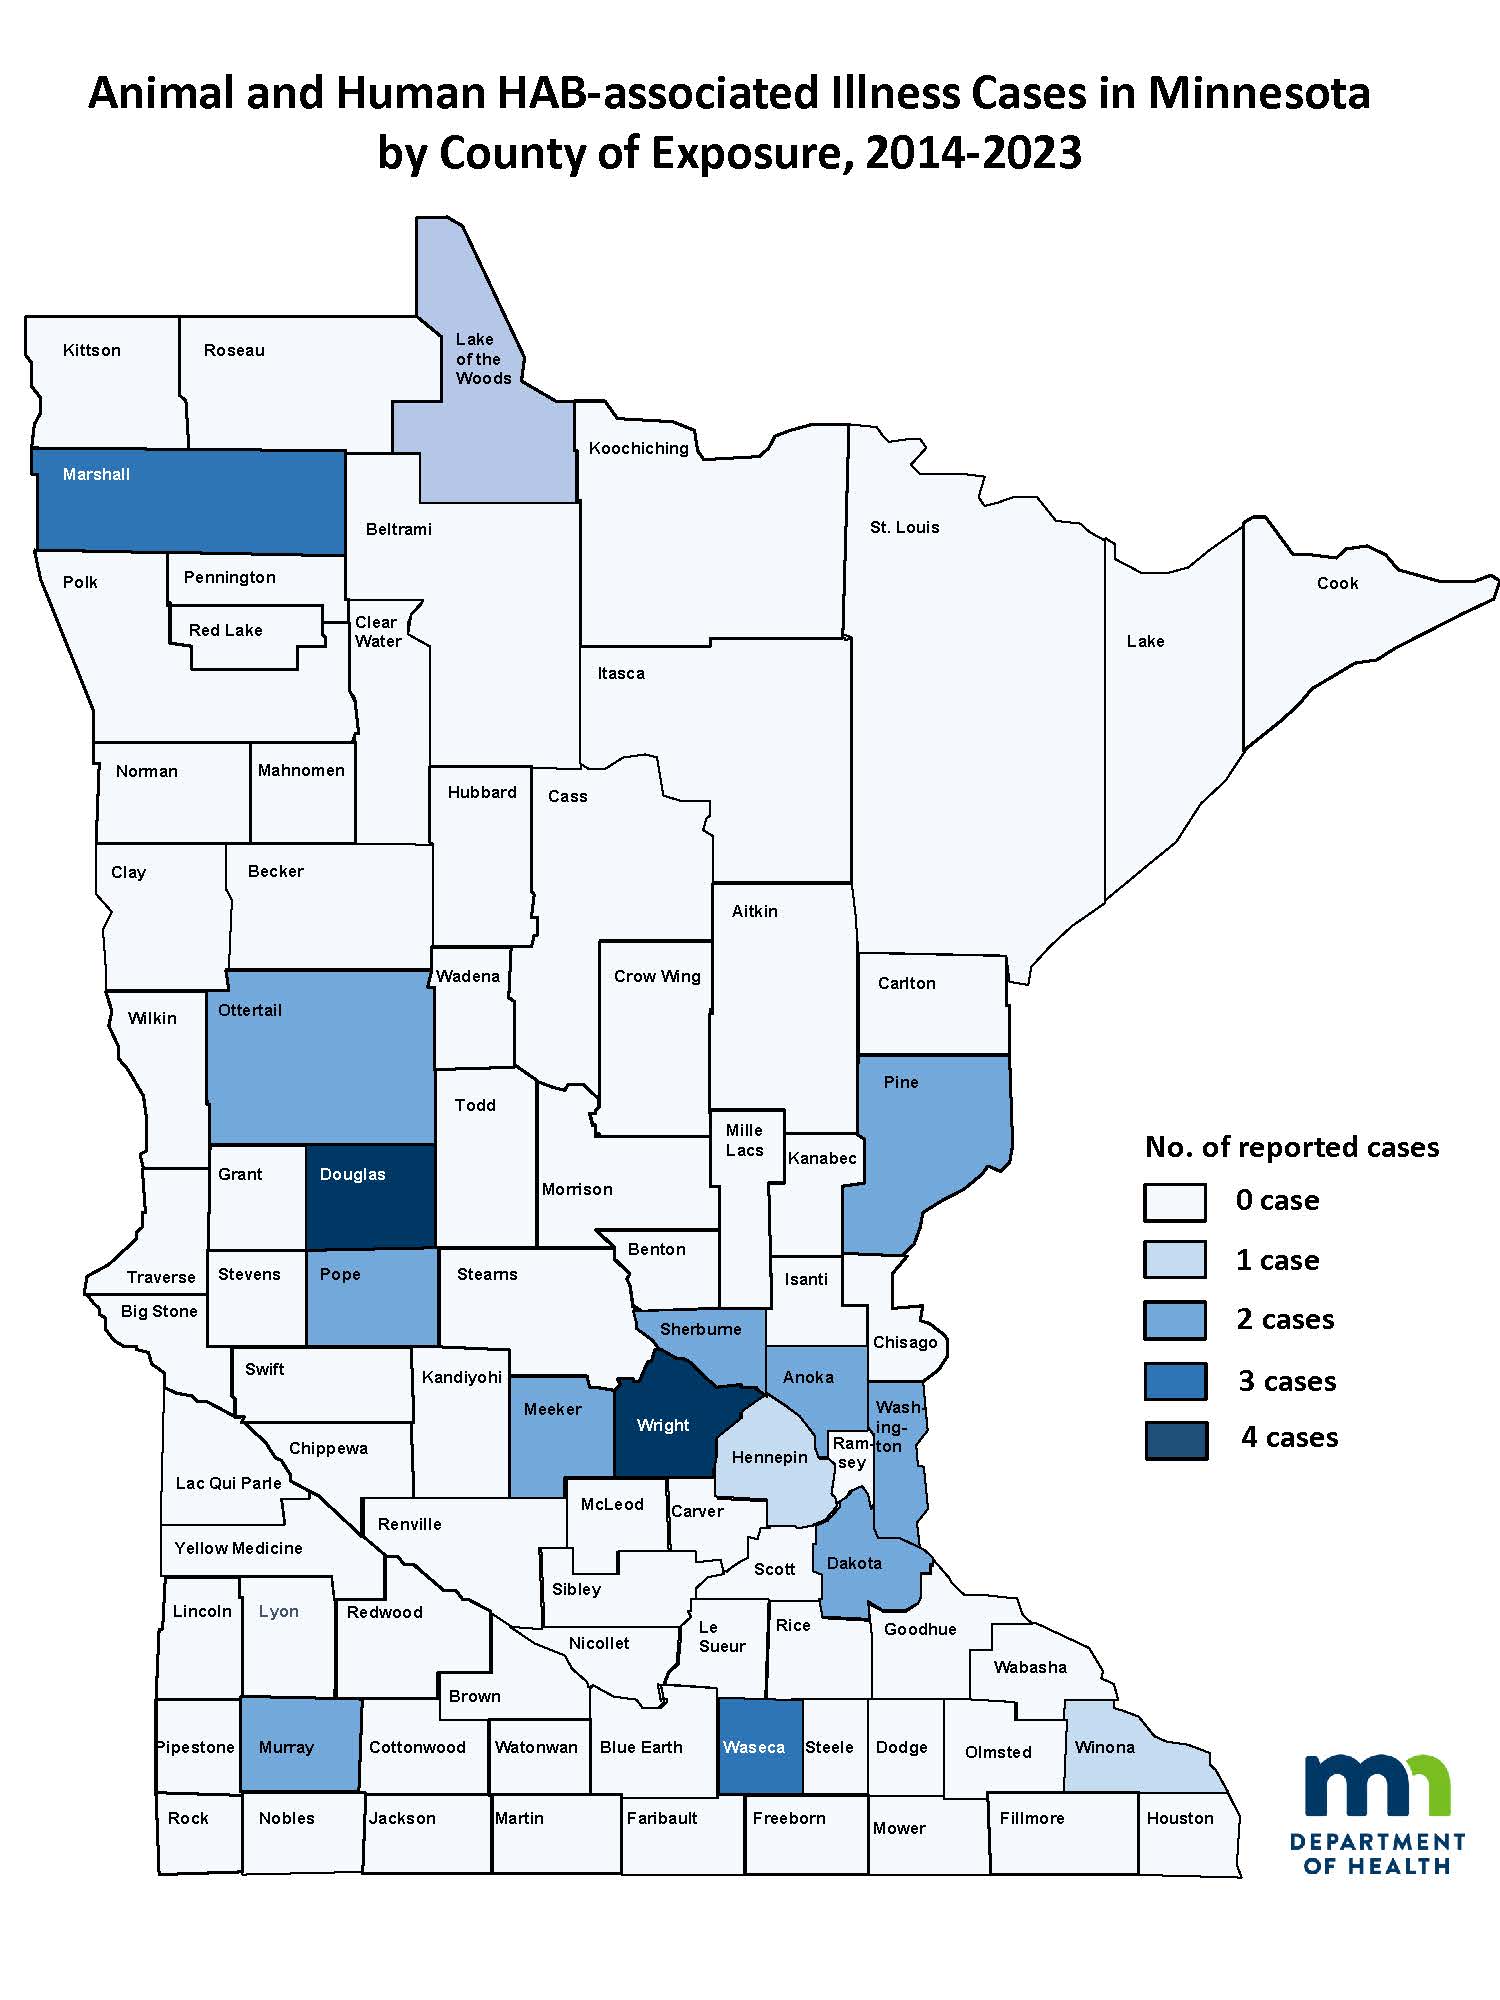 Animal and Human HAB-Associated Illness Cases in Minnesota by County of Exposure, 2014-2022